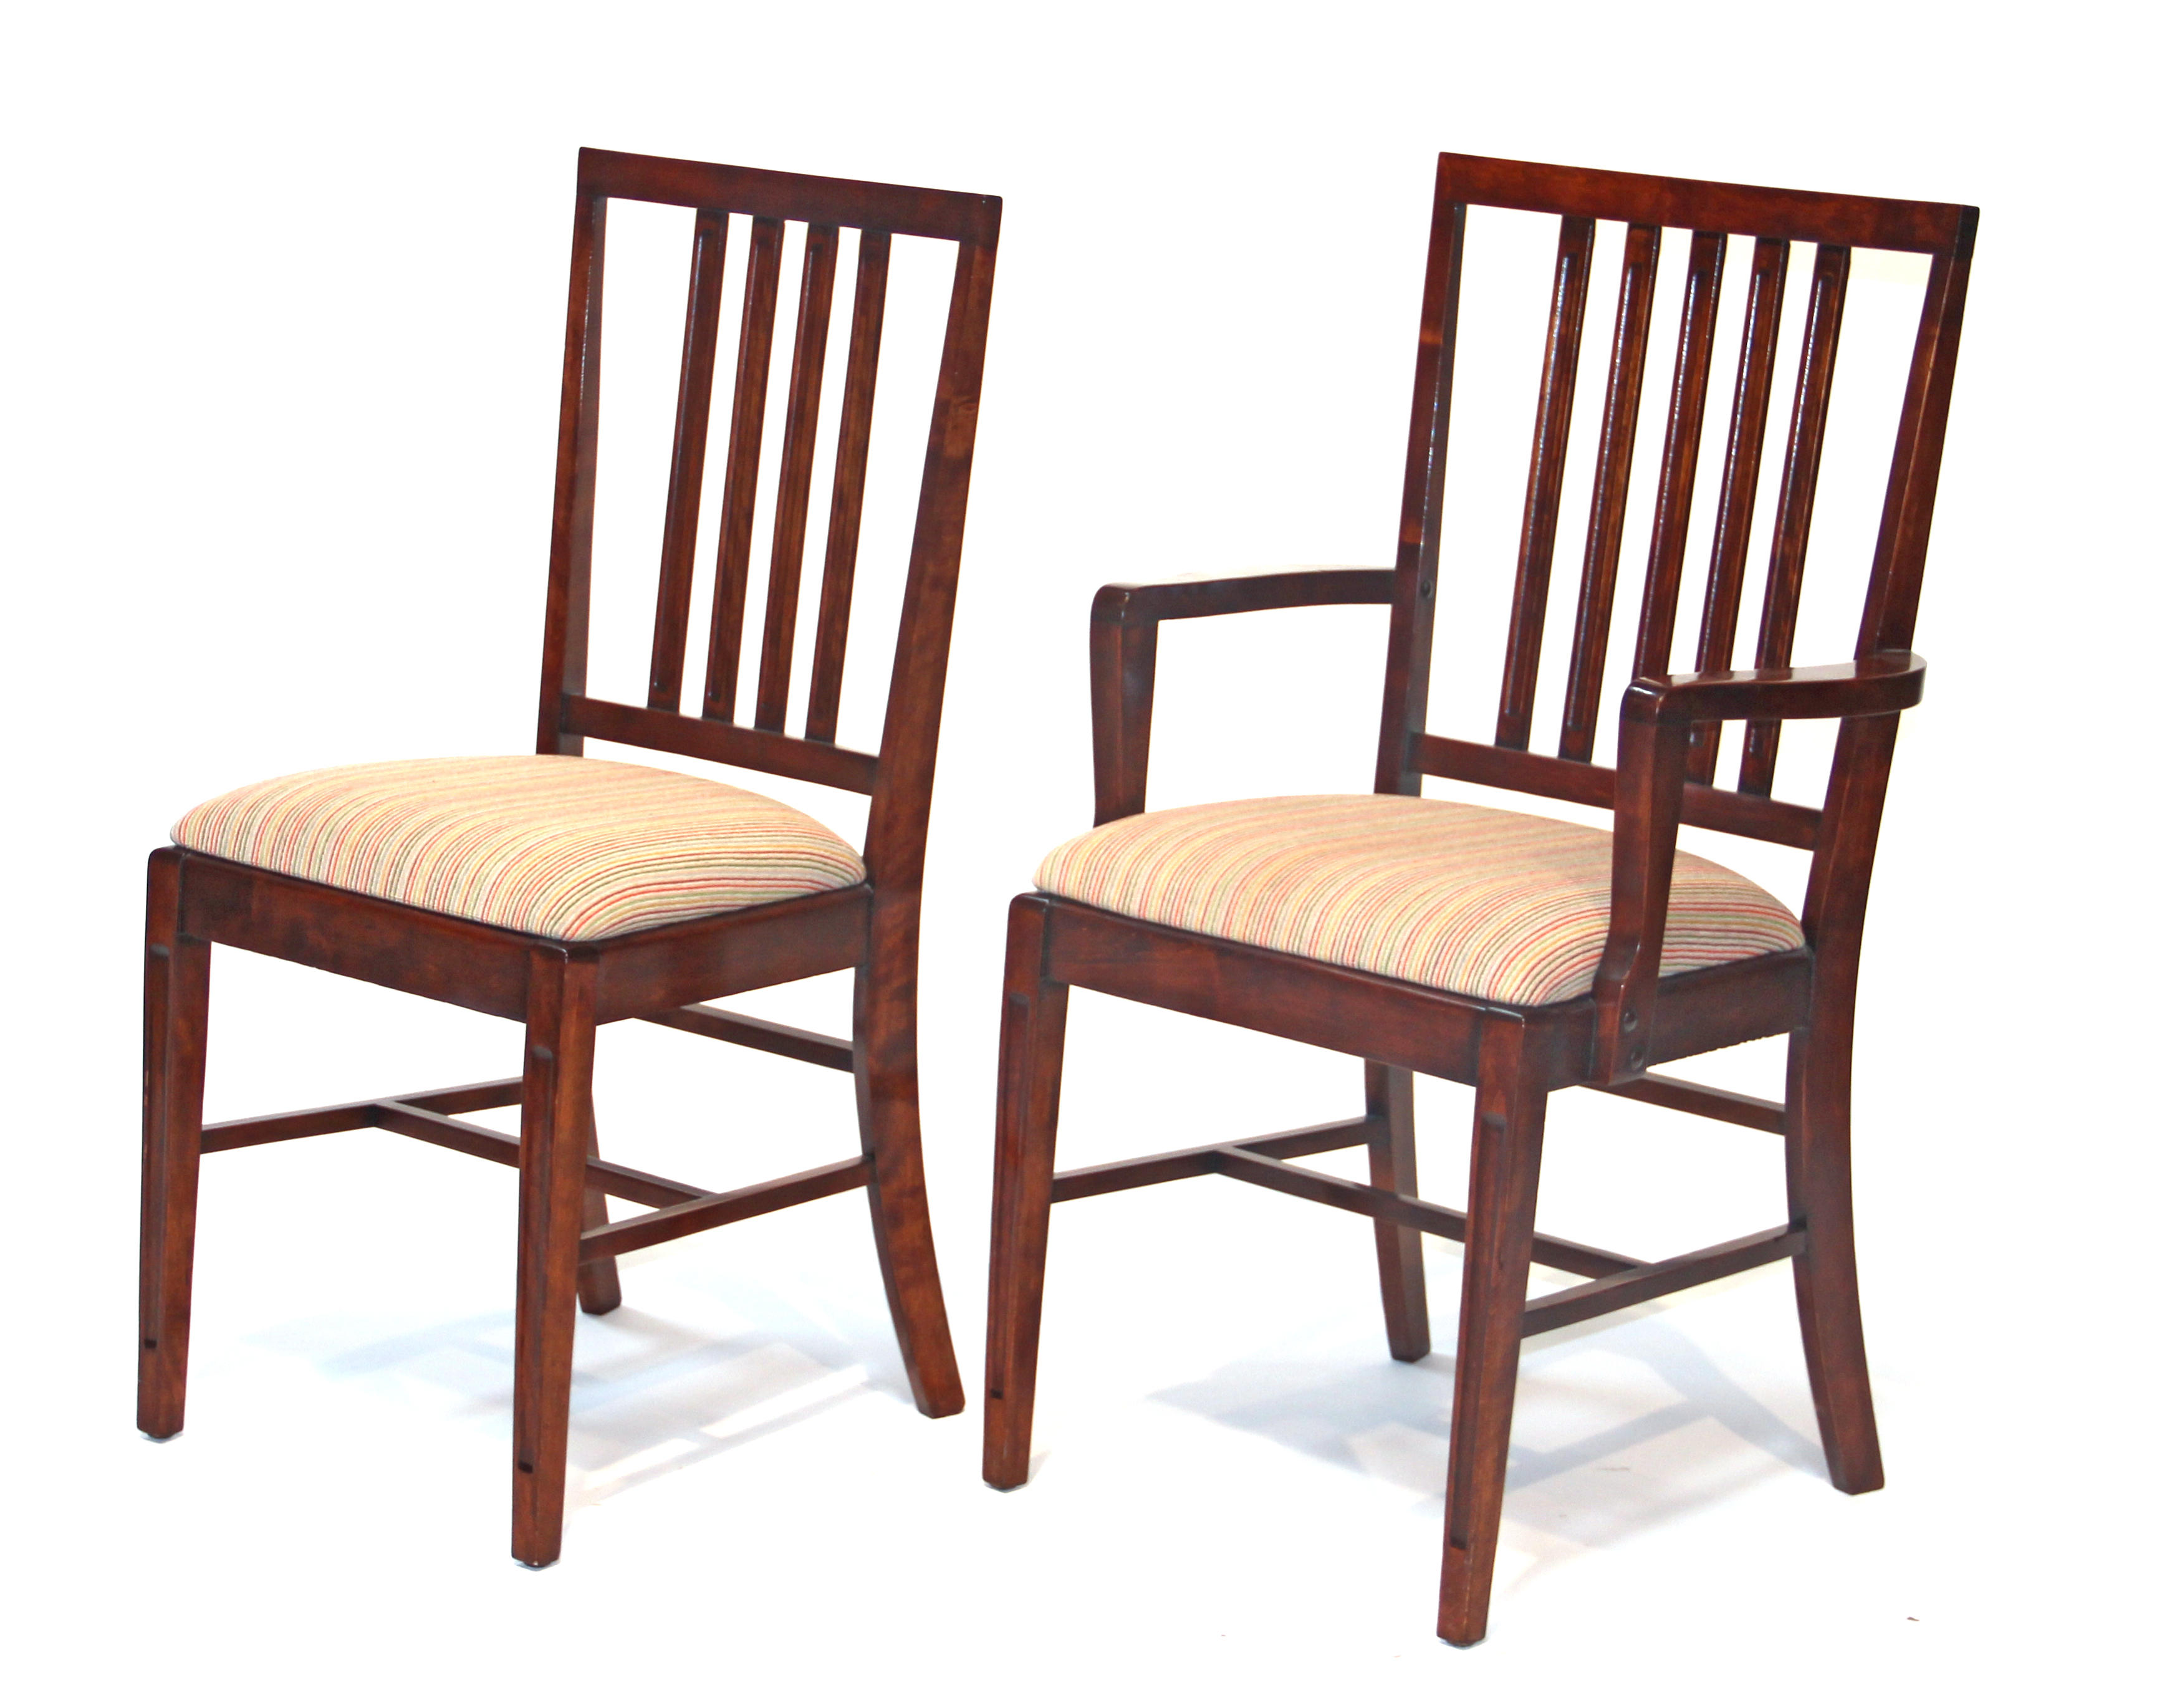 A set of six George III style stained birch dining chairs